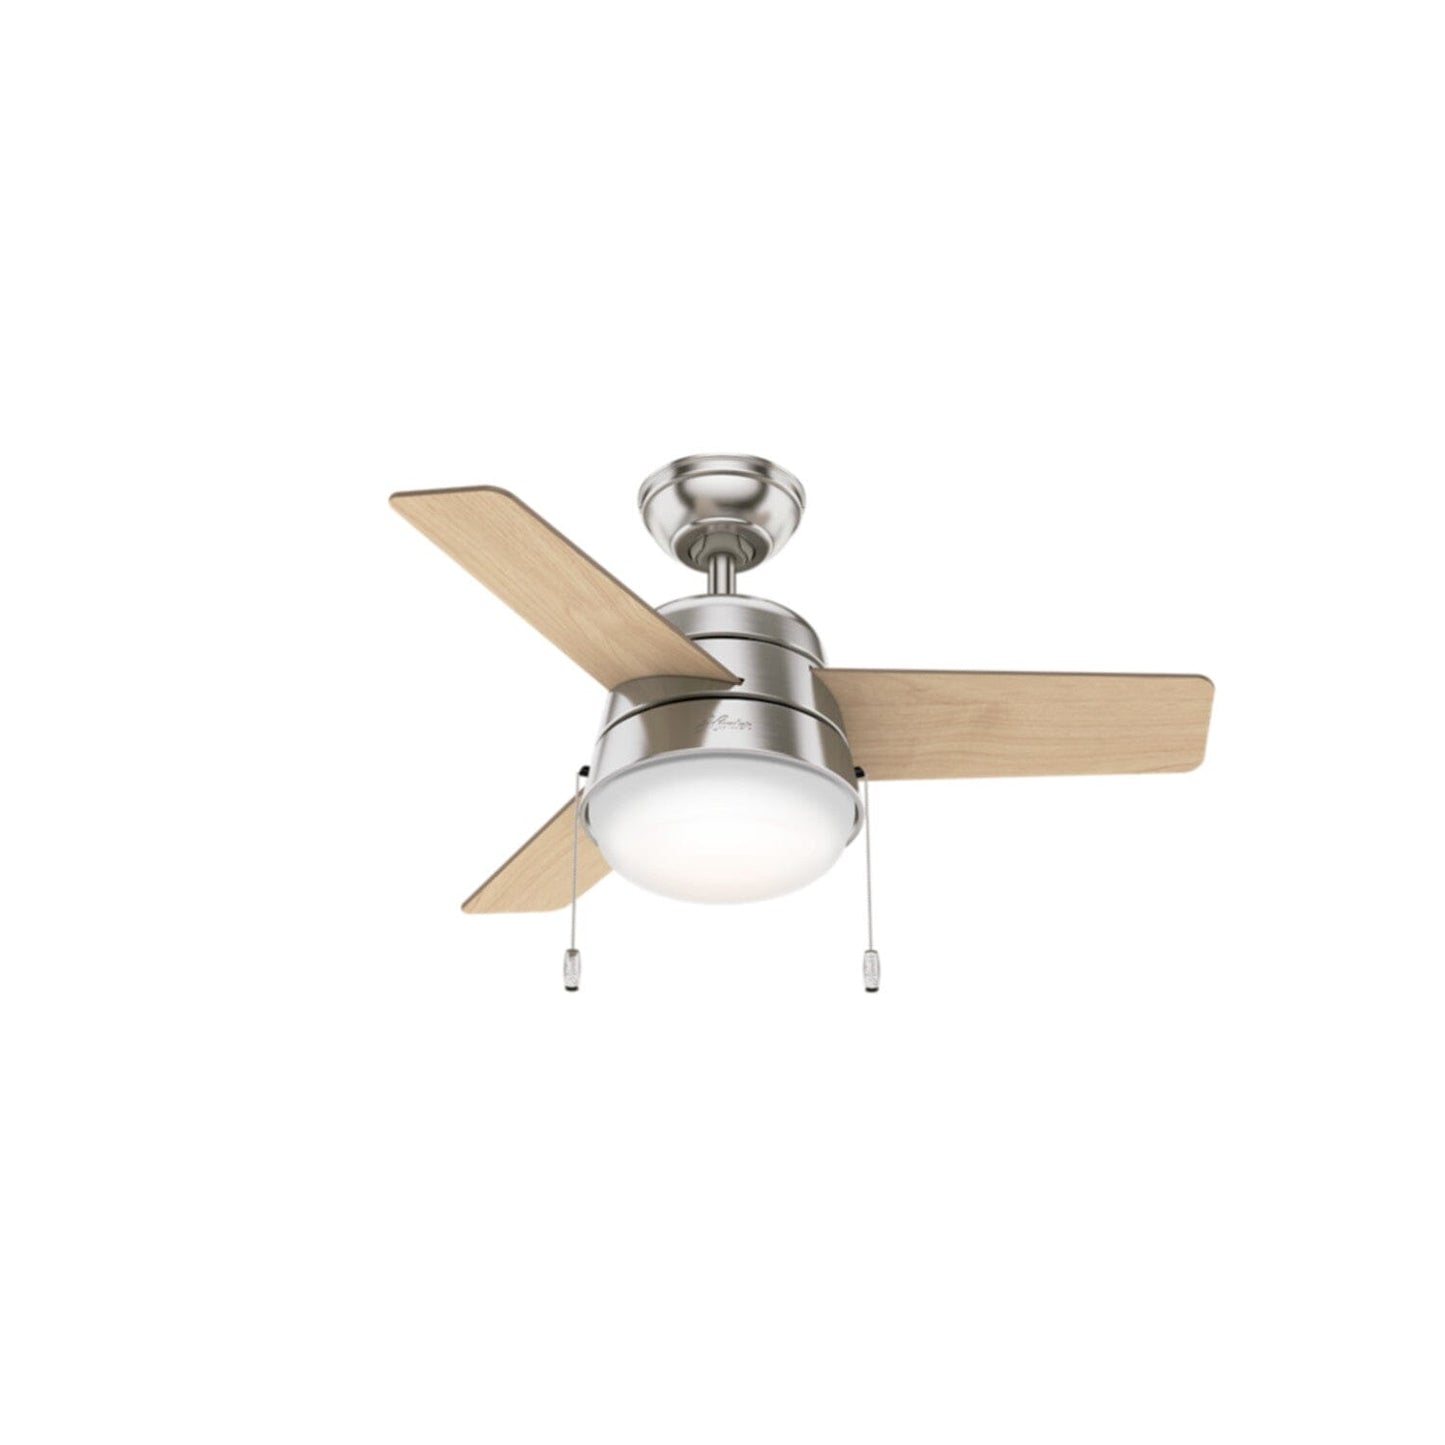 Aker with LED Light 36 inch Ceiling Fans Hunter Brushed Nickel - American Walnut 